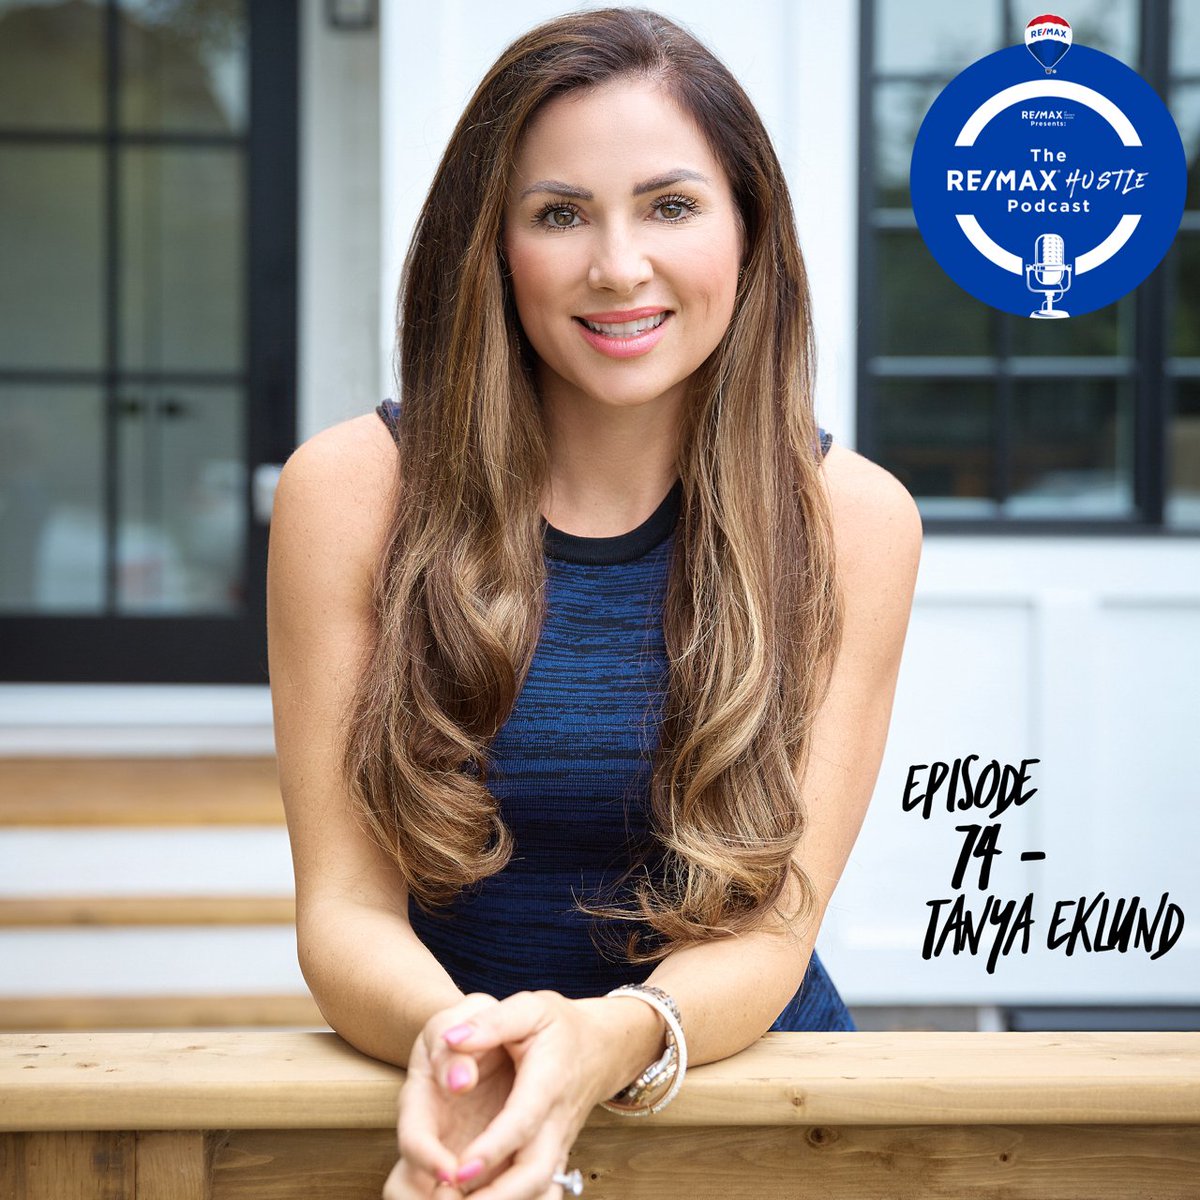 Episode 74 of the RE/MAX Hustle Podcast featuring Tanya Eklund Group RE/MAX Real Estate Central is live! The RE/MAX Hustle Podcast is available on Apple Podcasts, Spotify, or can be found here: anchor.fm/remax-of-weste…